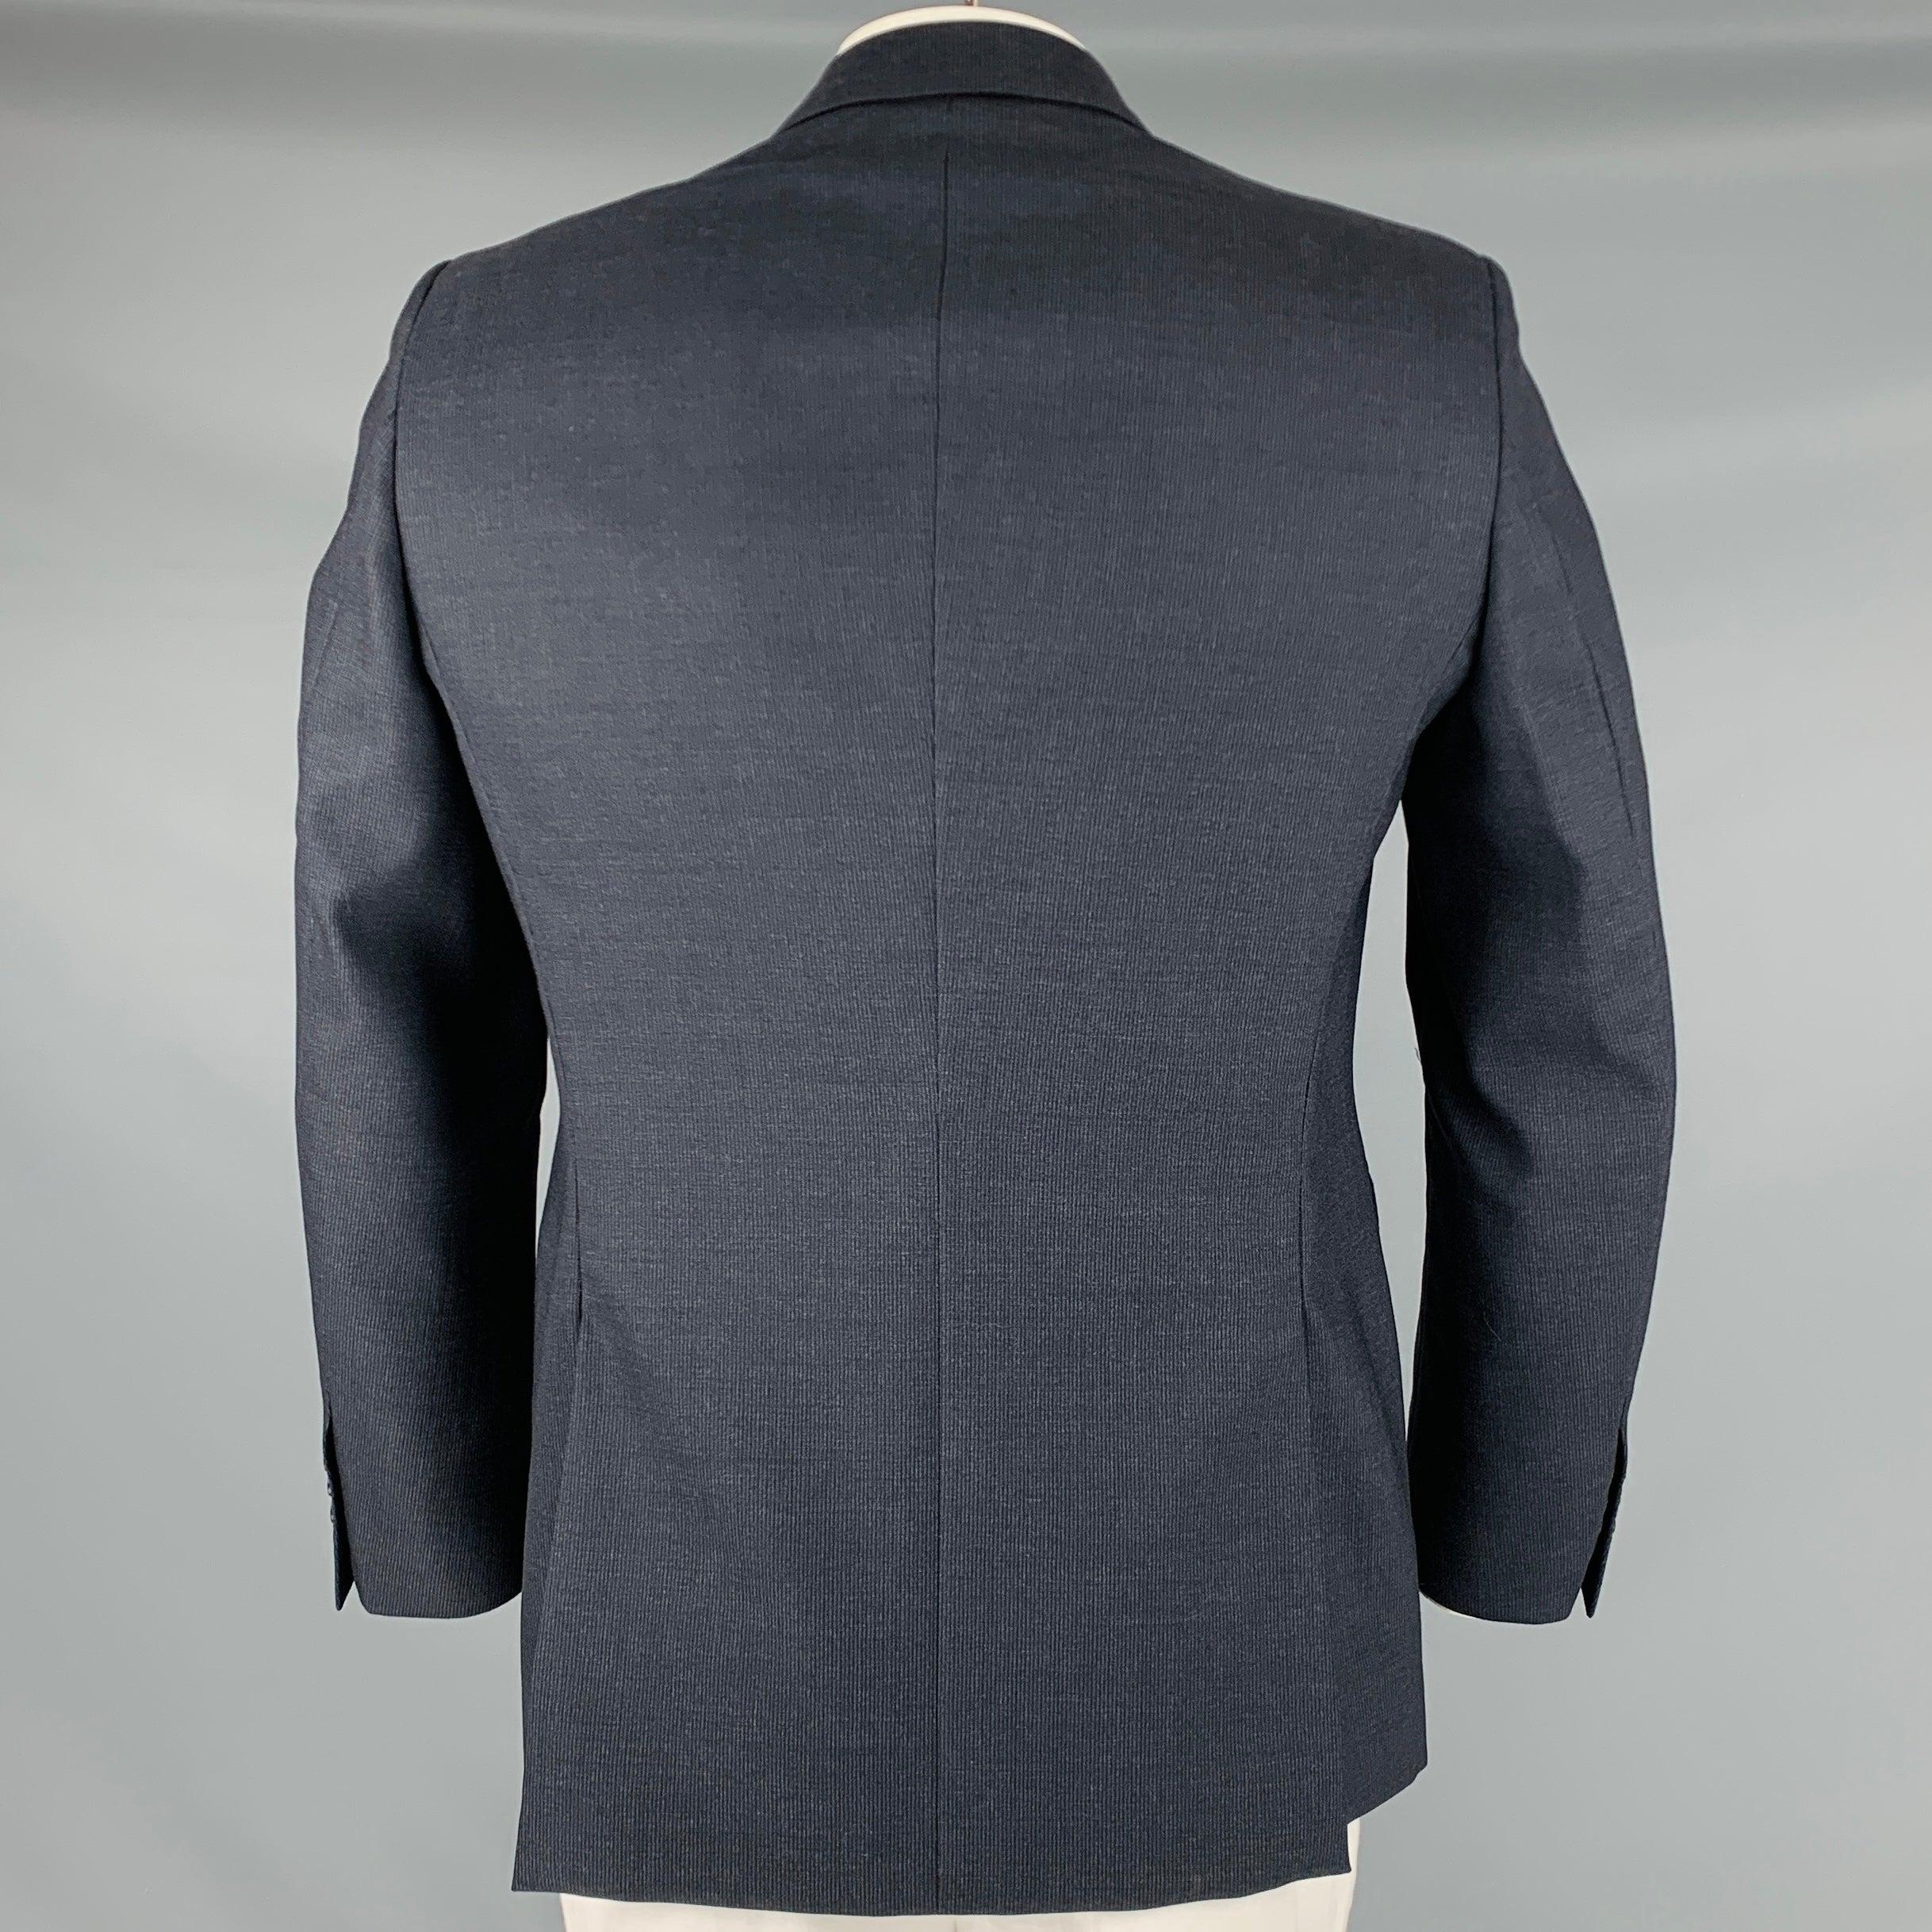 BURBERRY PRORSUM Size 42 Grey Textured Virgin Wool Sport Coat In Good Condition For Sale In San Francisco, CA